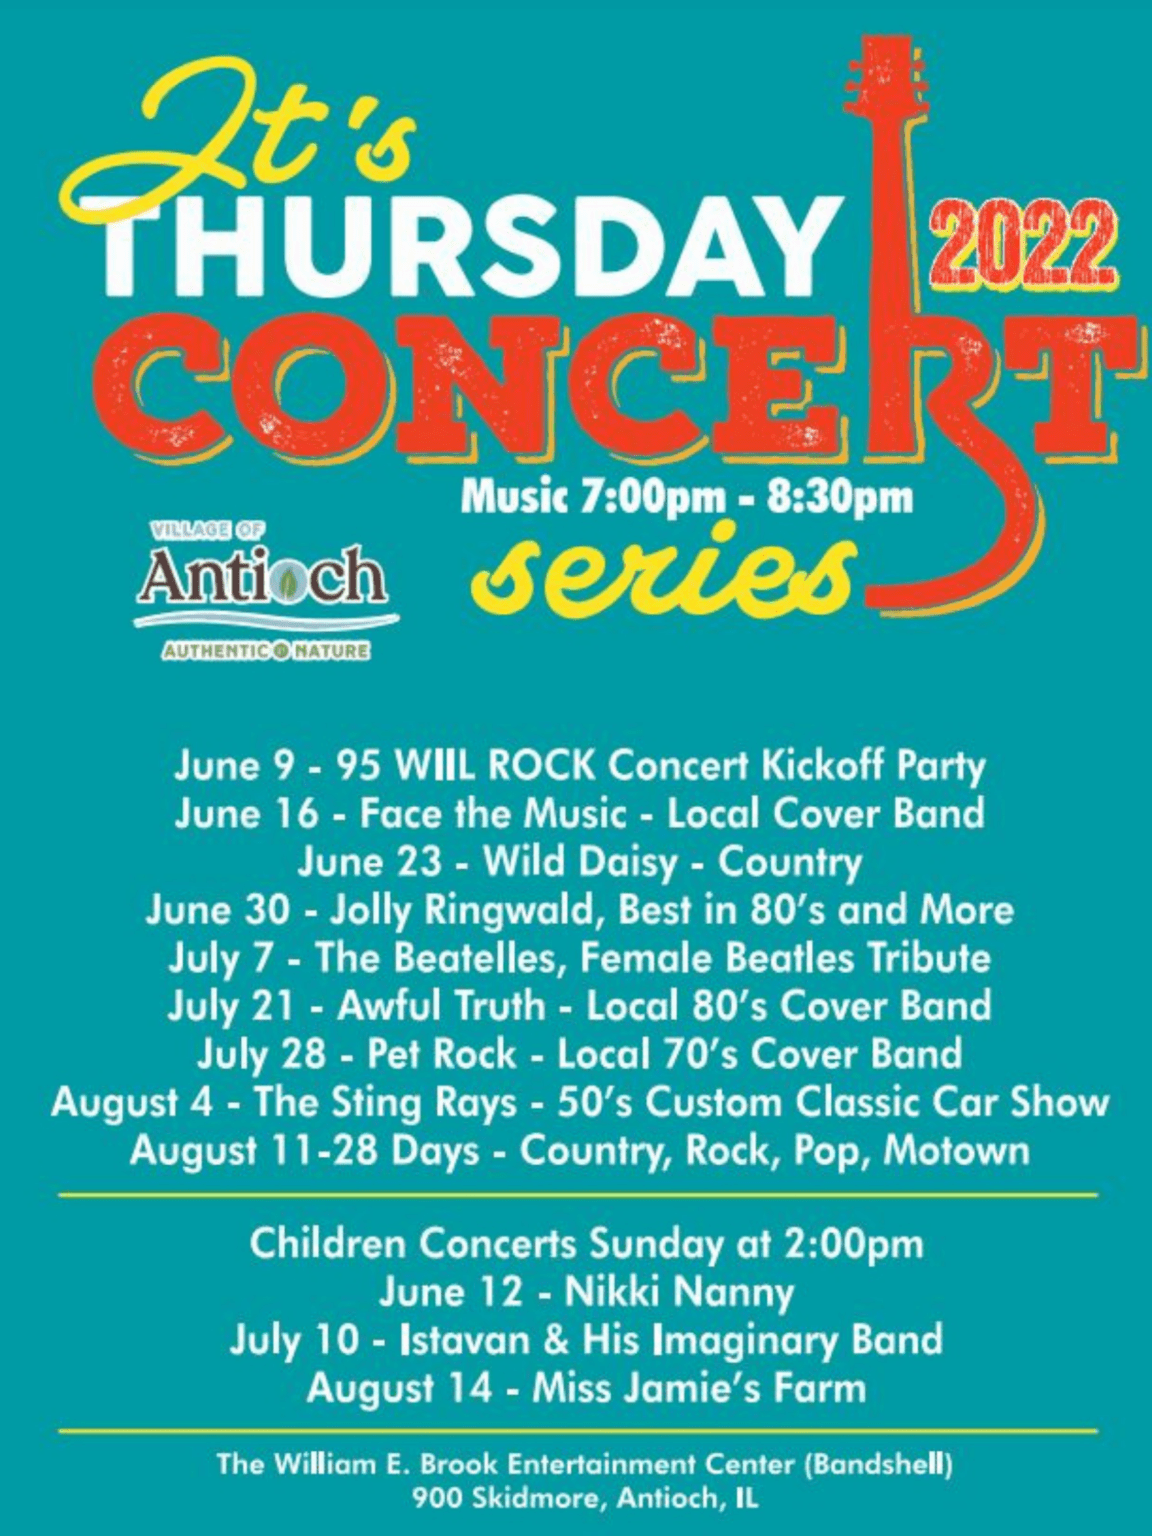 Thursday Night Concert Series at the Bandshell Antioch, IL